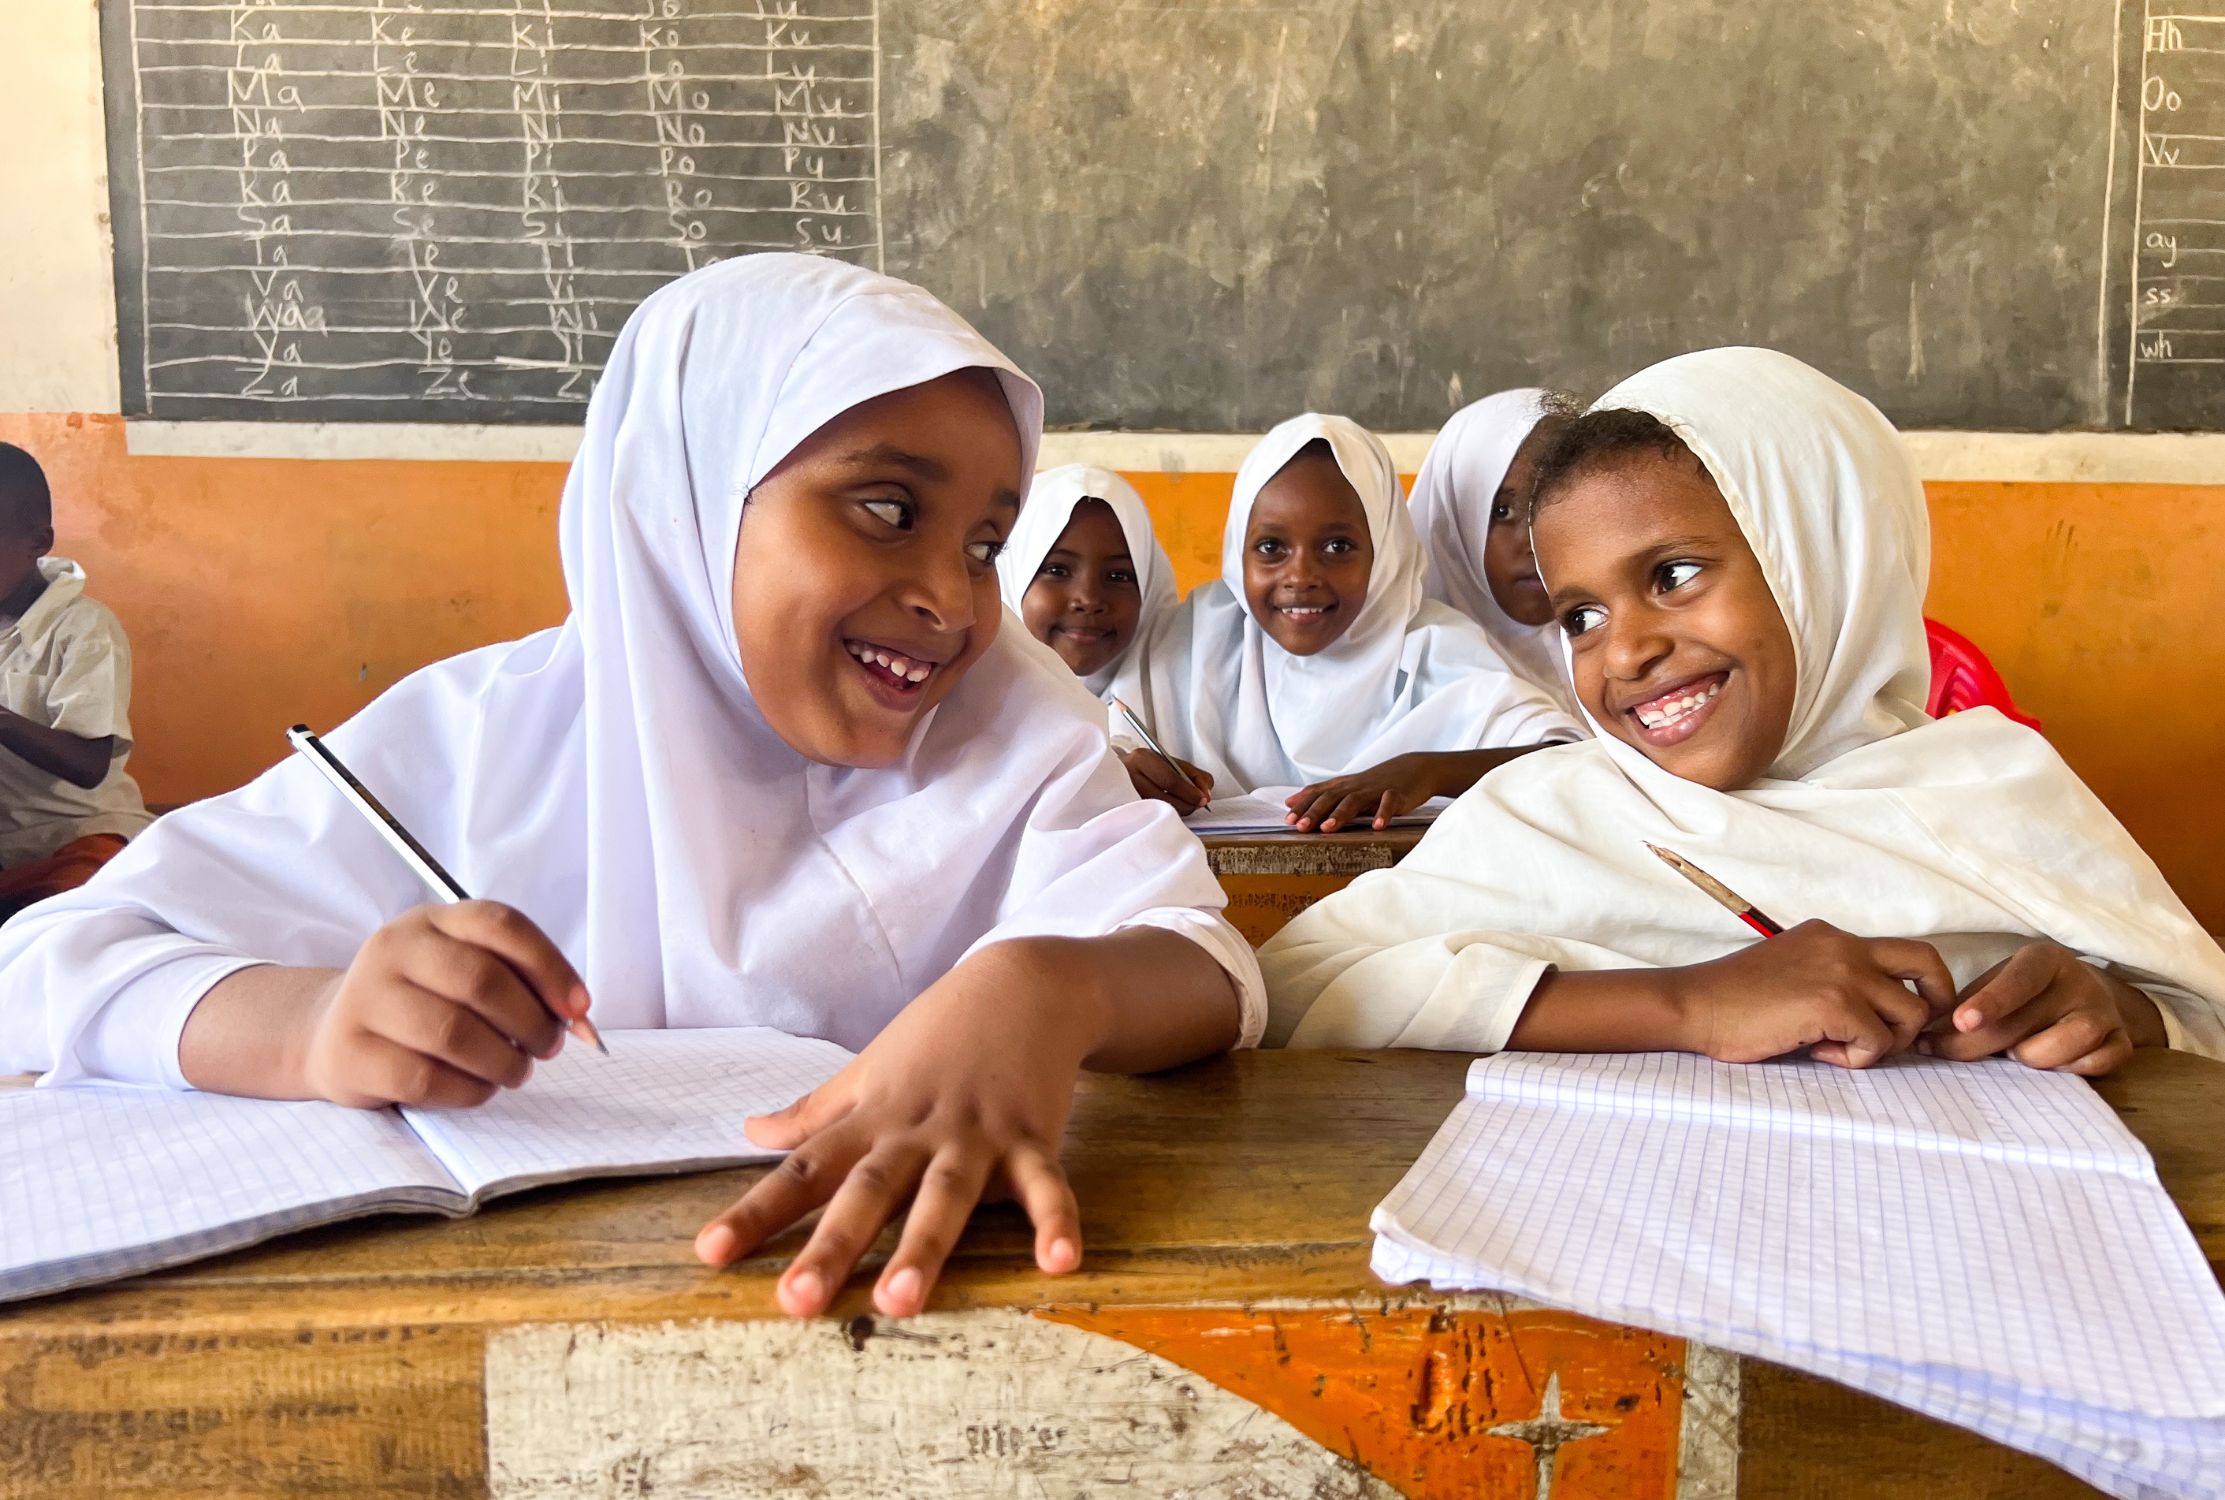 Kenyan girls smiling each other while sat at a desk with their school books. They're both wearing white hijabs